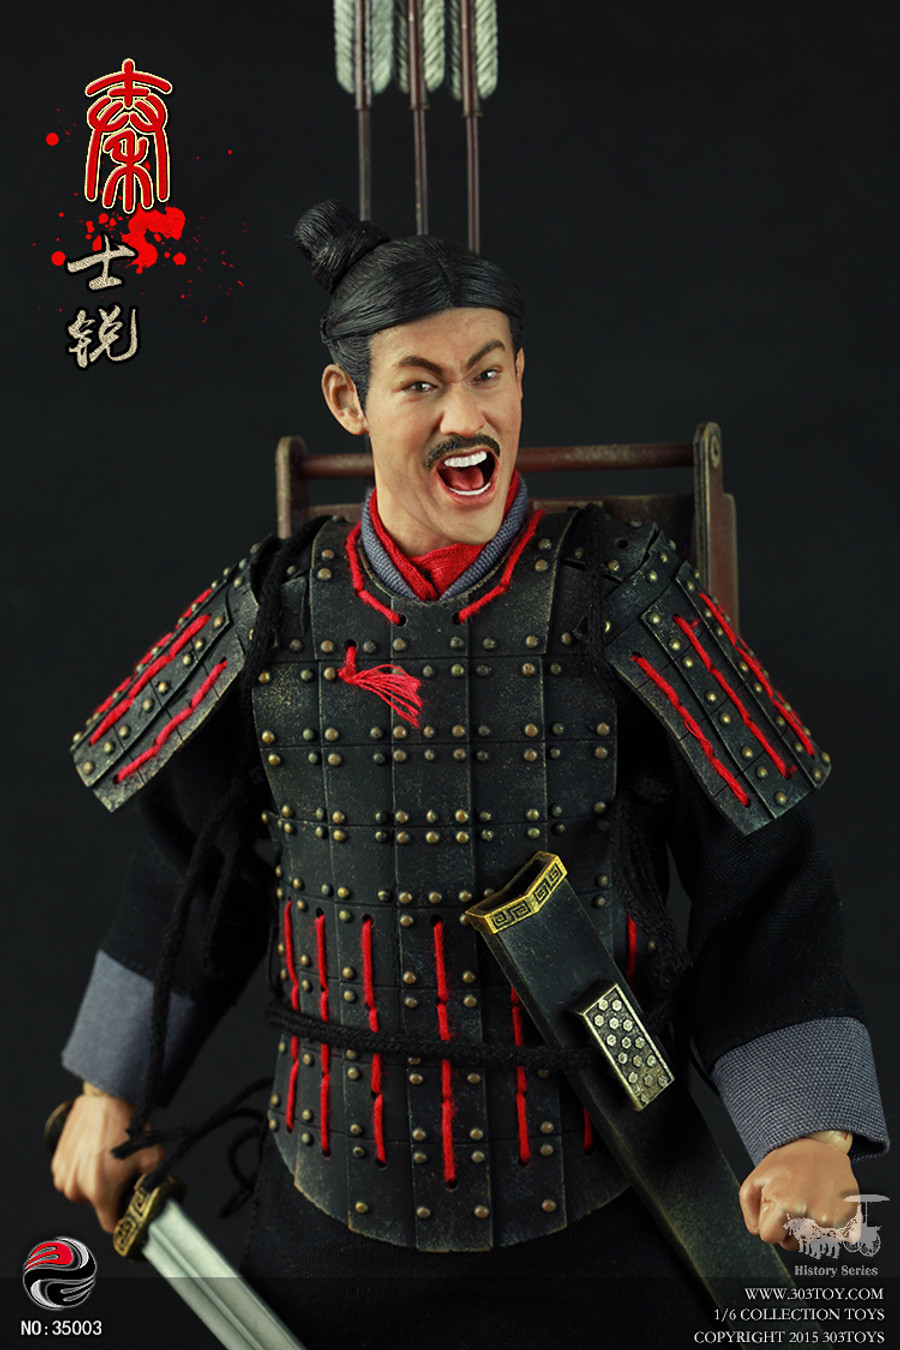 303 Toys - Qin Soldiers Sharp (China Qin Dynasty soldiers)